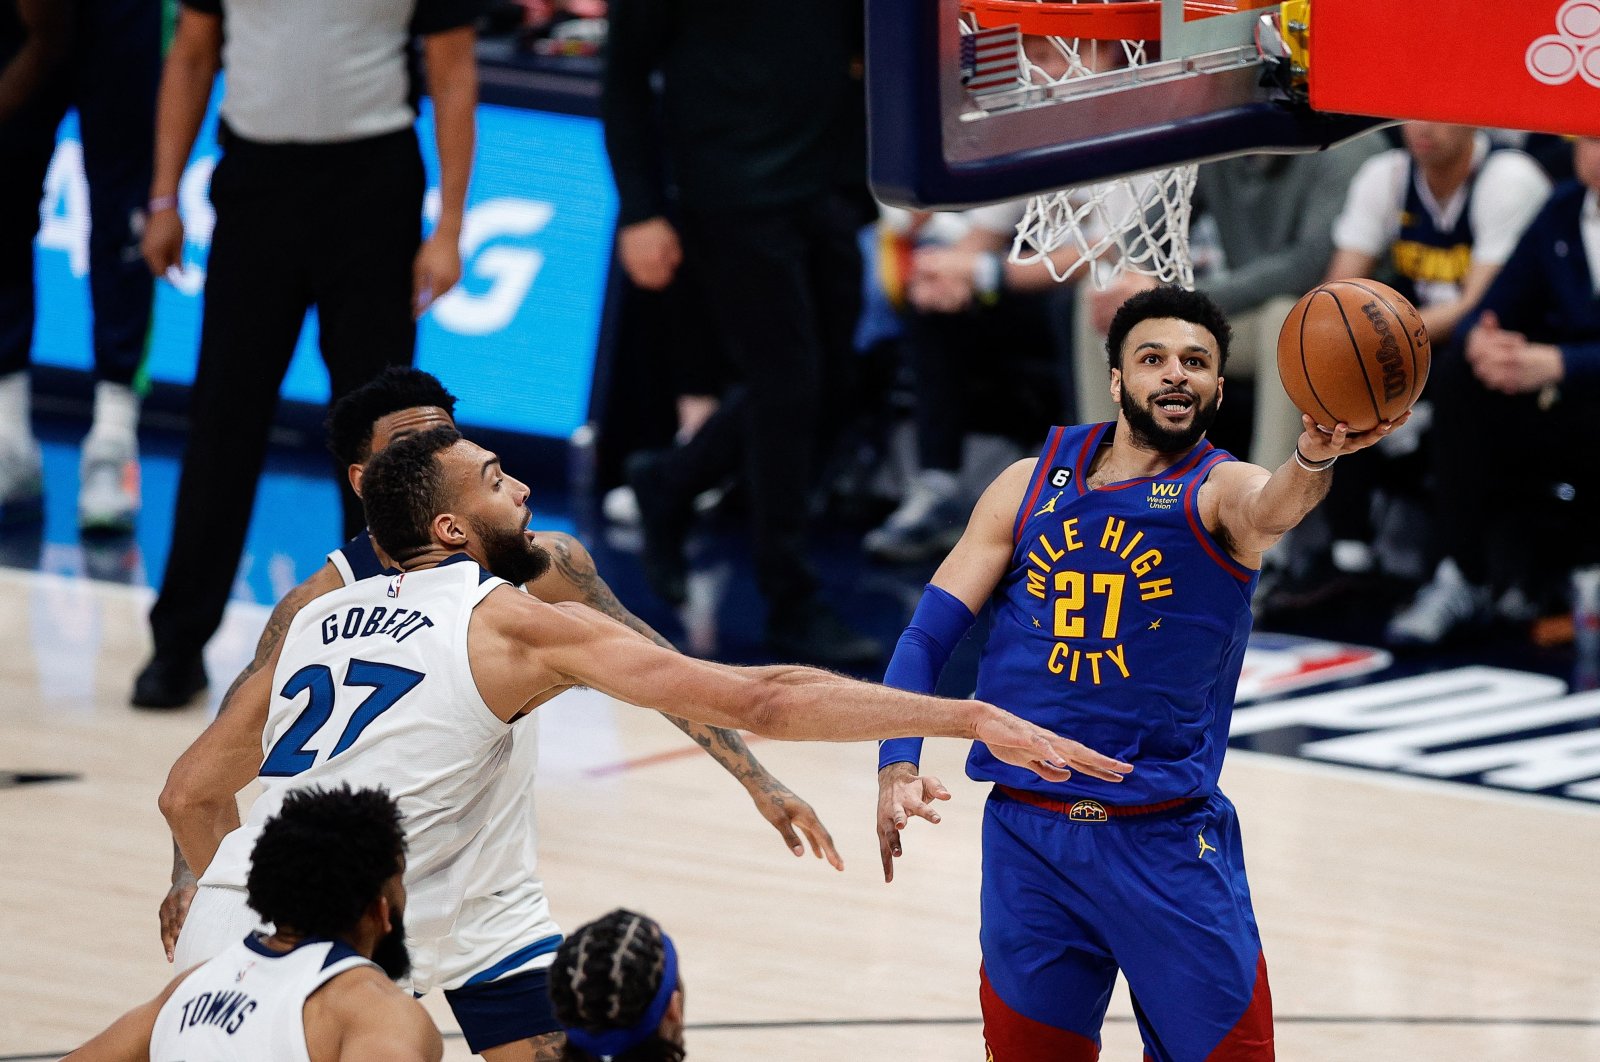 Denver Nuggets guard Jamal Murray (R) drives to the net against Minnesota Timberwolves center Rudy Gobert (L) in the third quarter during Game 1 of the 2023 NBA Playoffs at Ball Arena, Denver, U.S., April 16, 2023. (Reuters Photo)